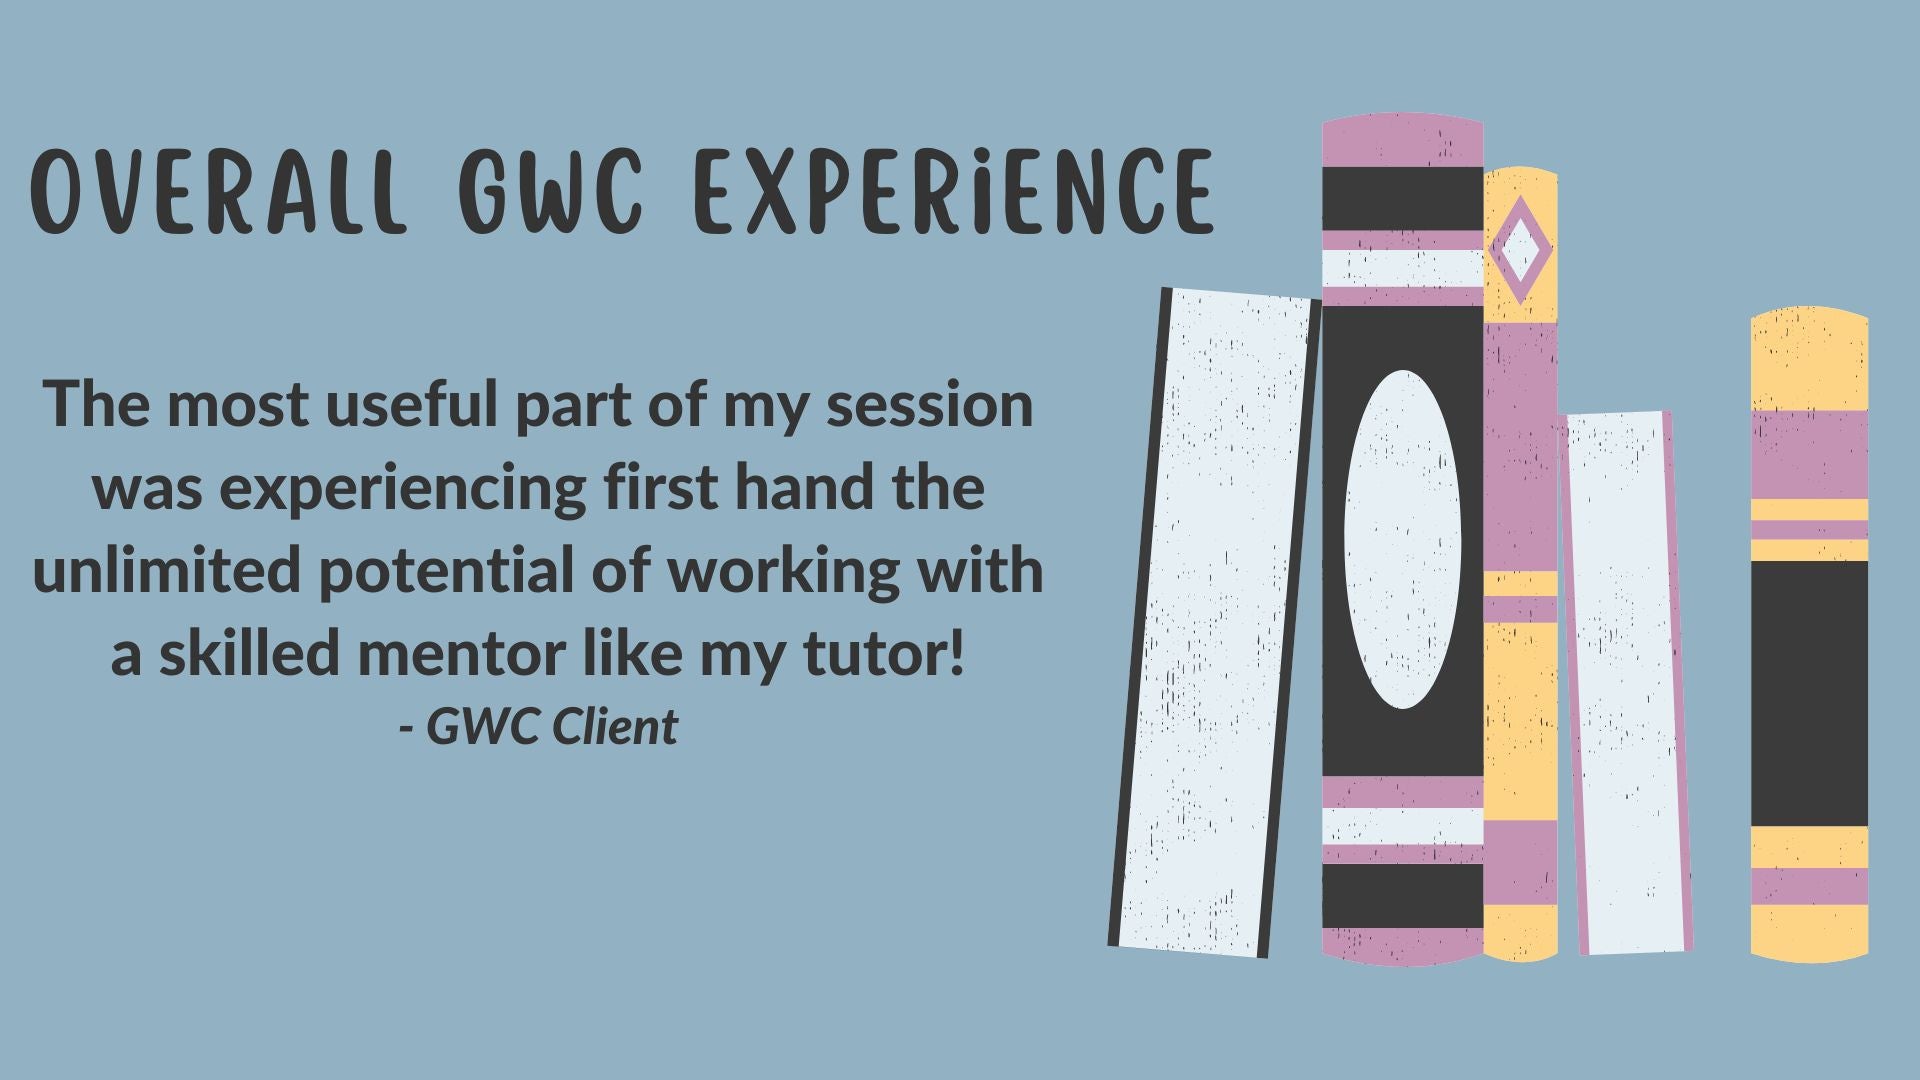 An image of GWC client feedback describing the "overall GWC experience":  The most useful part of my session was experiencing first hand the unlimited potential of working with a skilled mentor like my tutor!